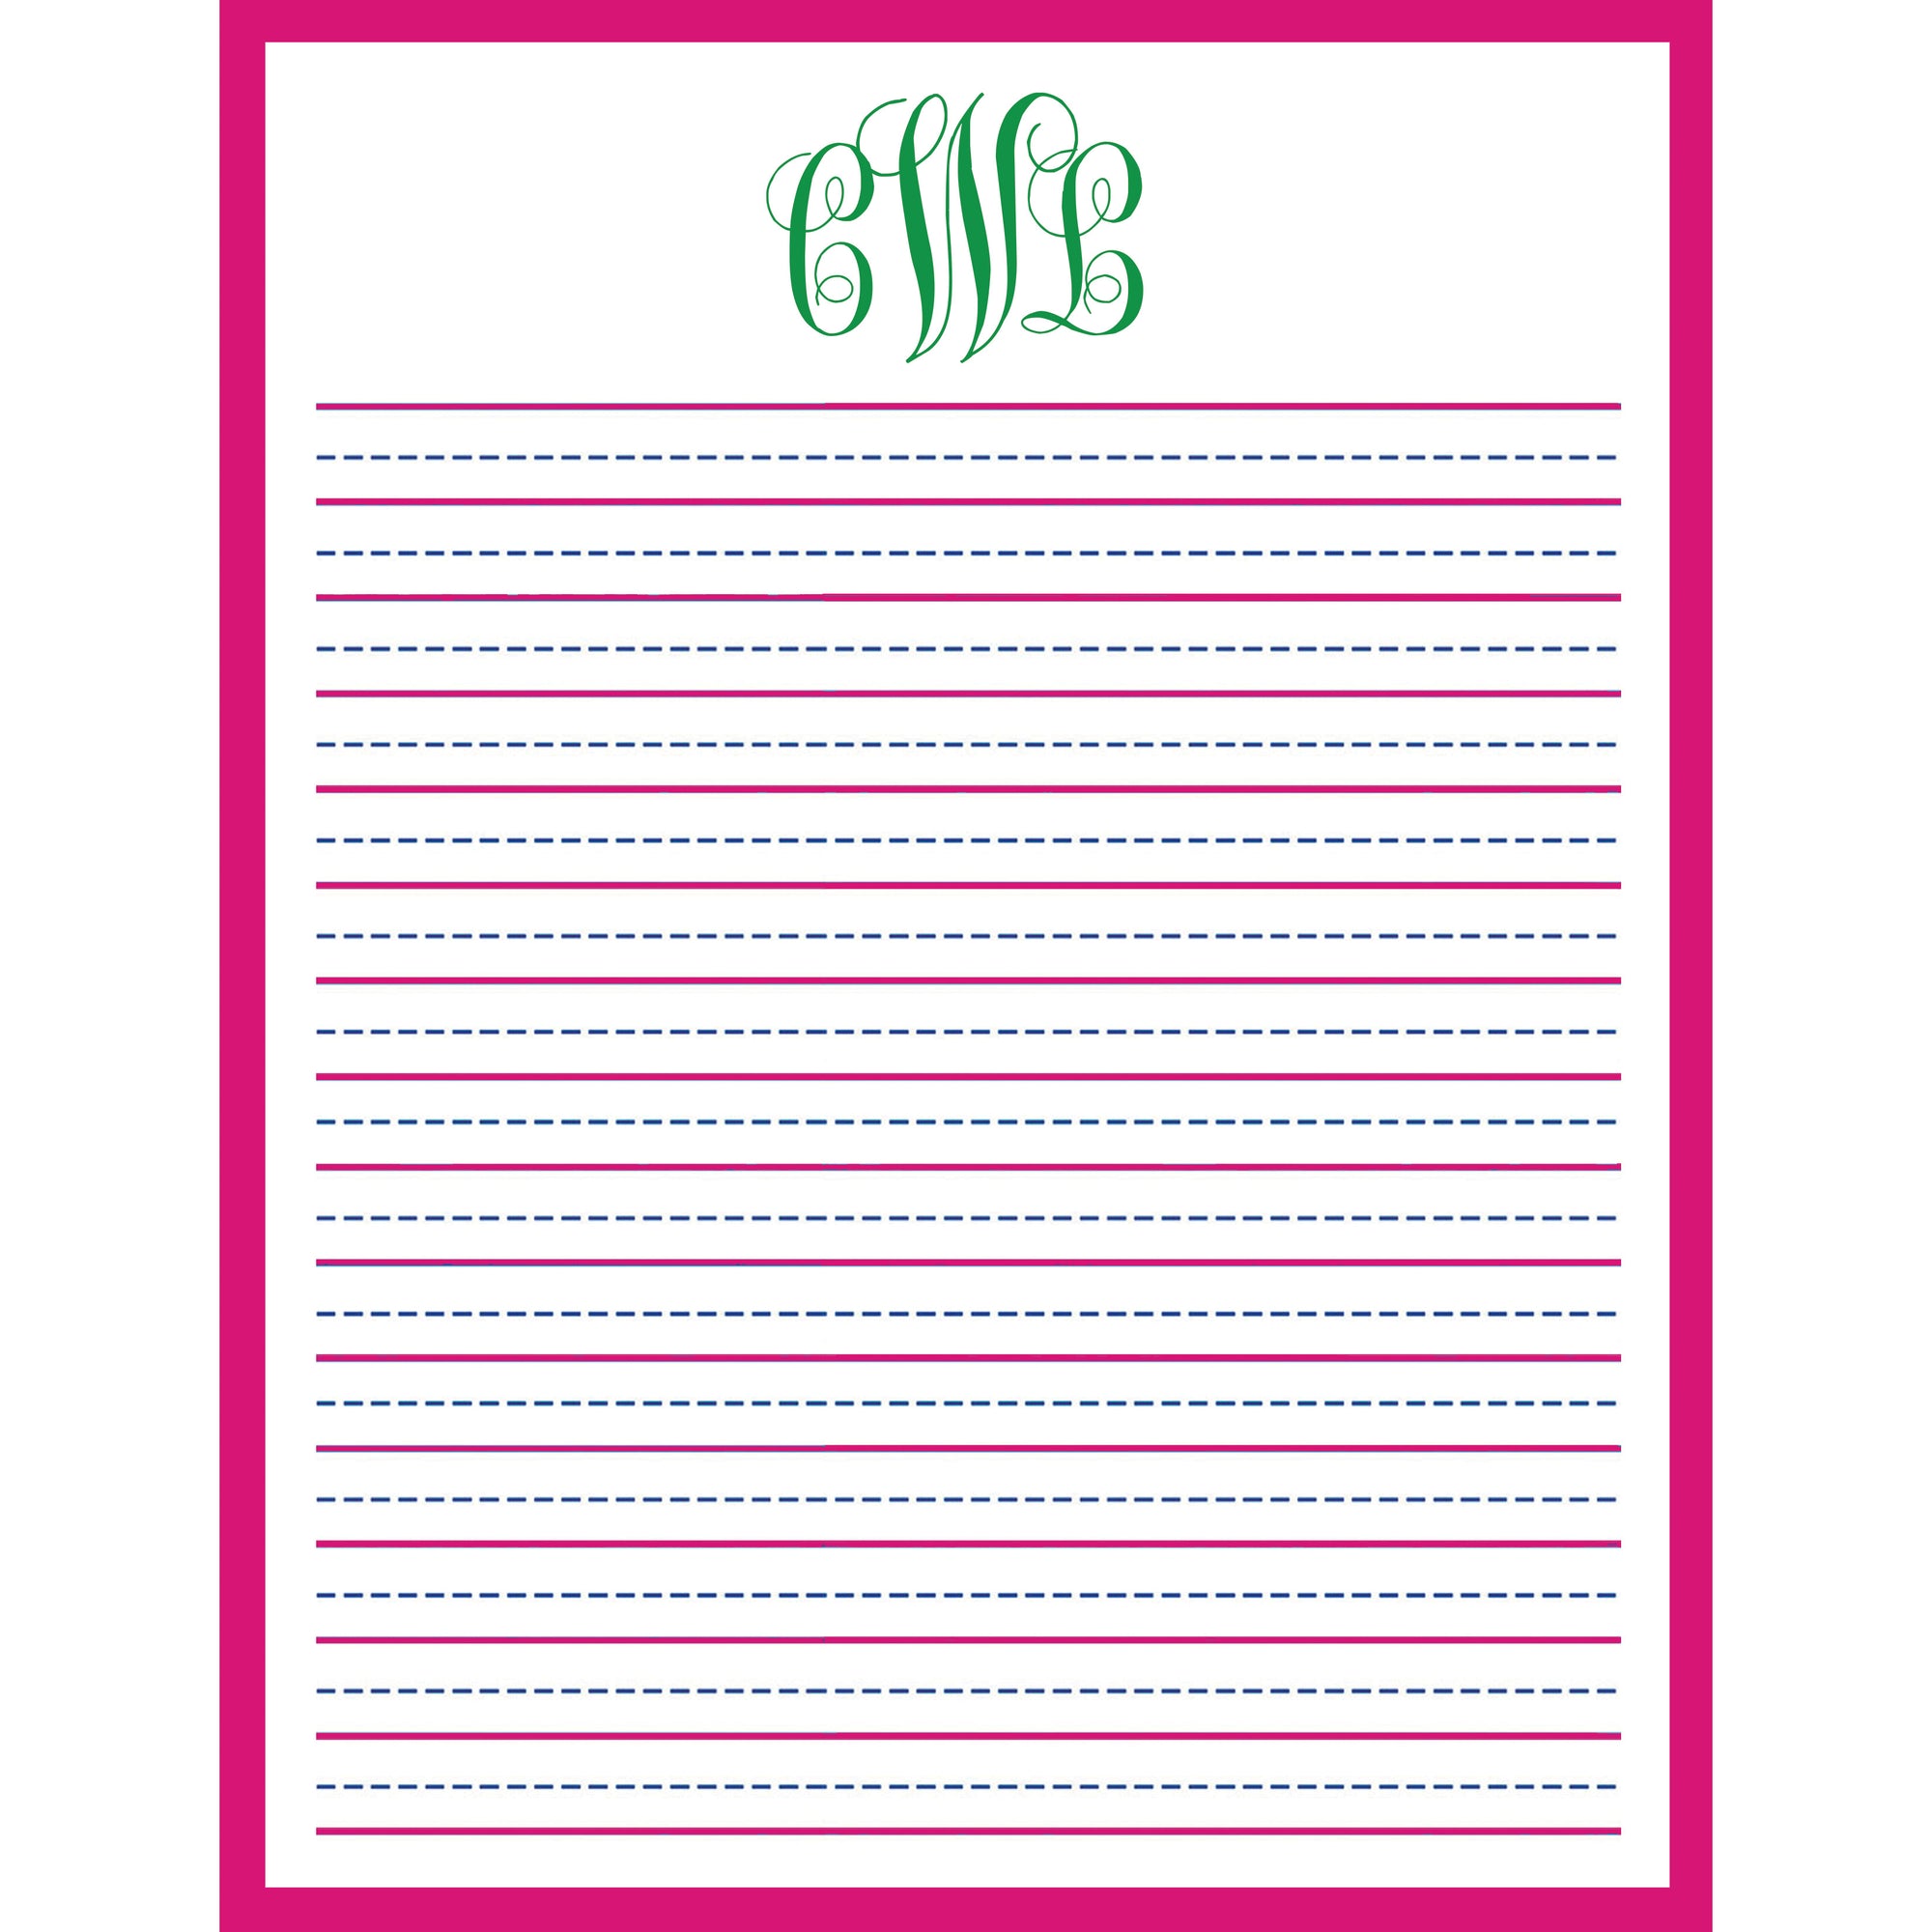 8.5x11 Preppy Monogram Lined Notepad (50 pages) | Hot Pink